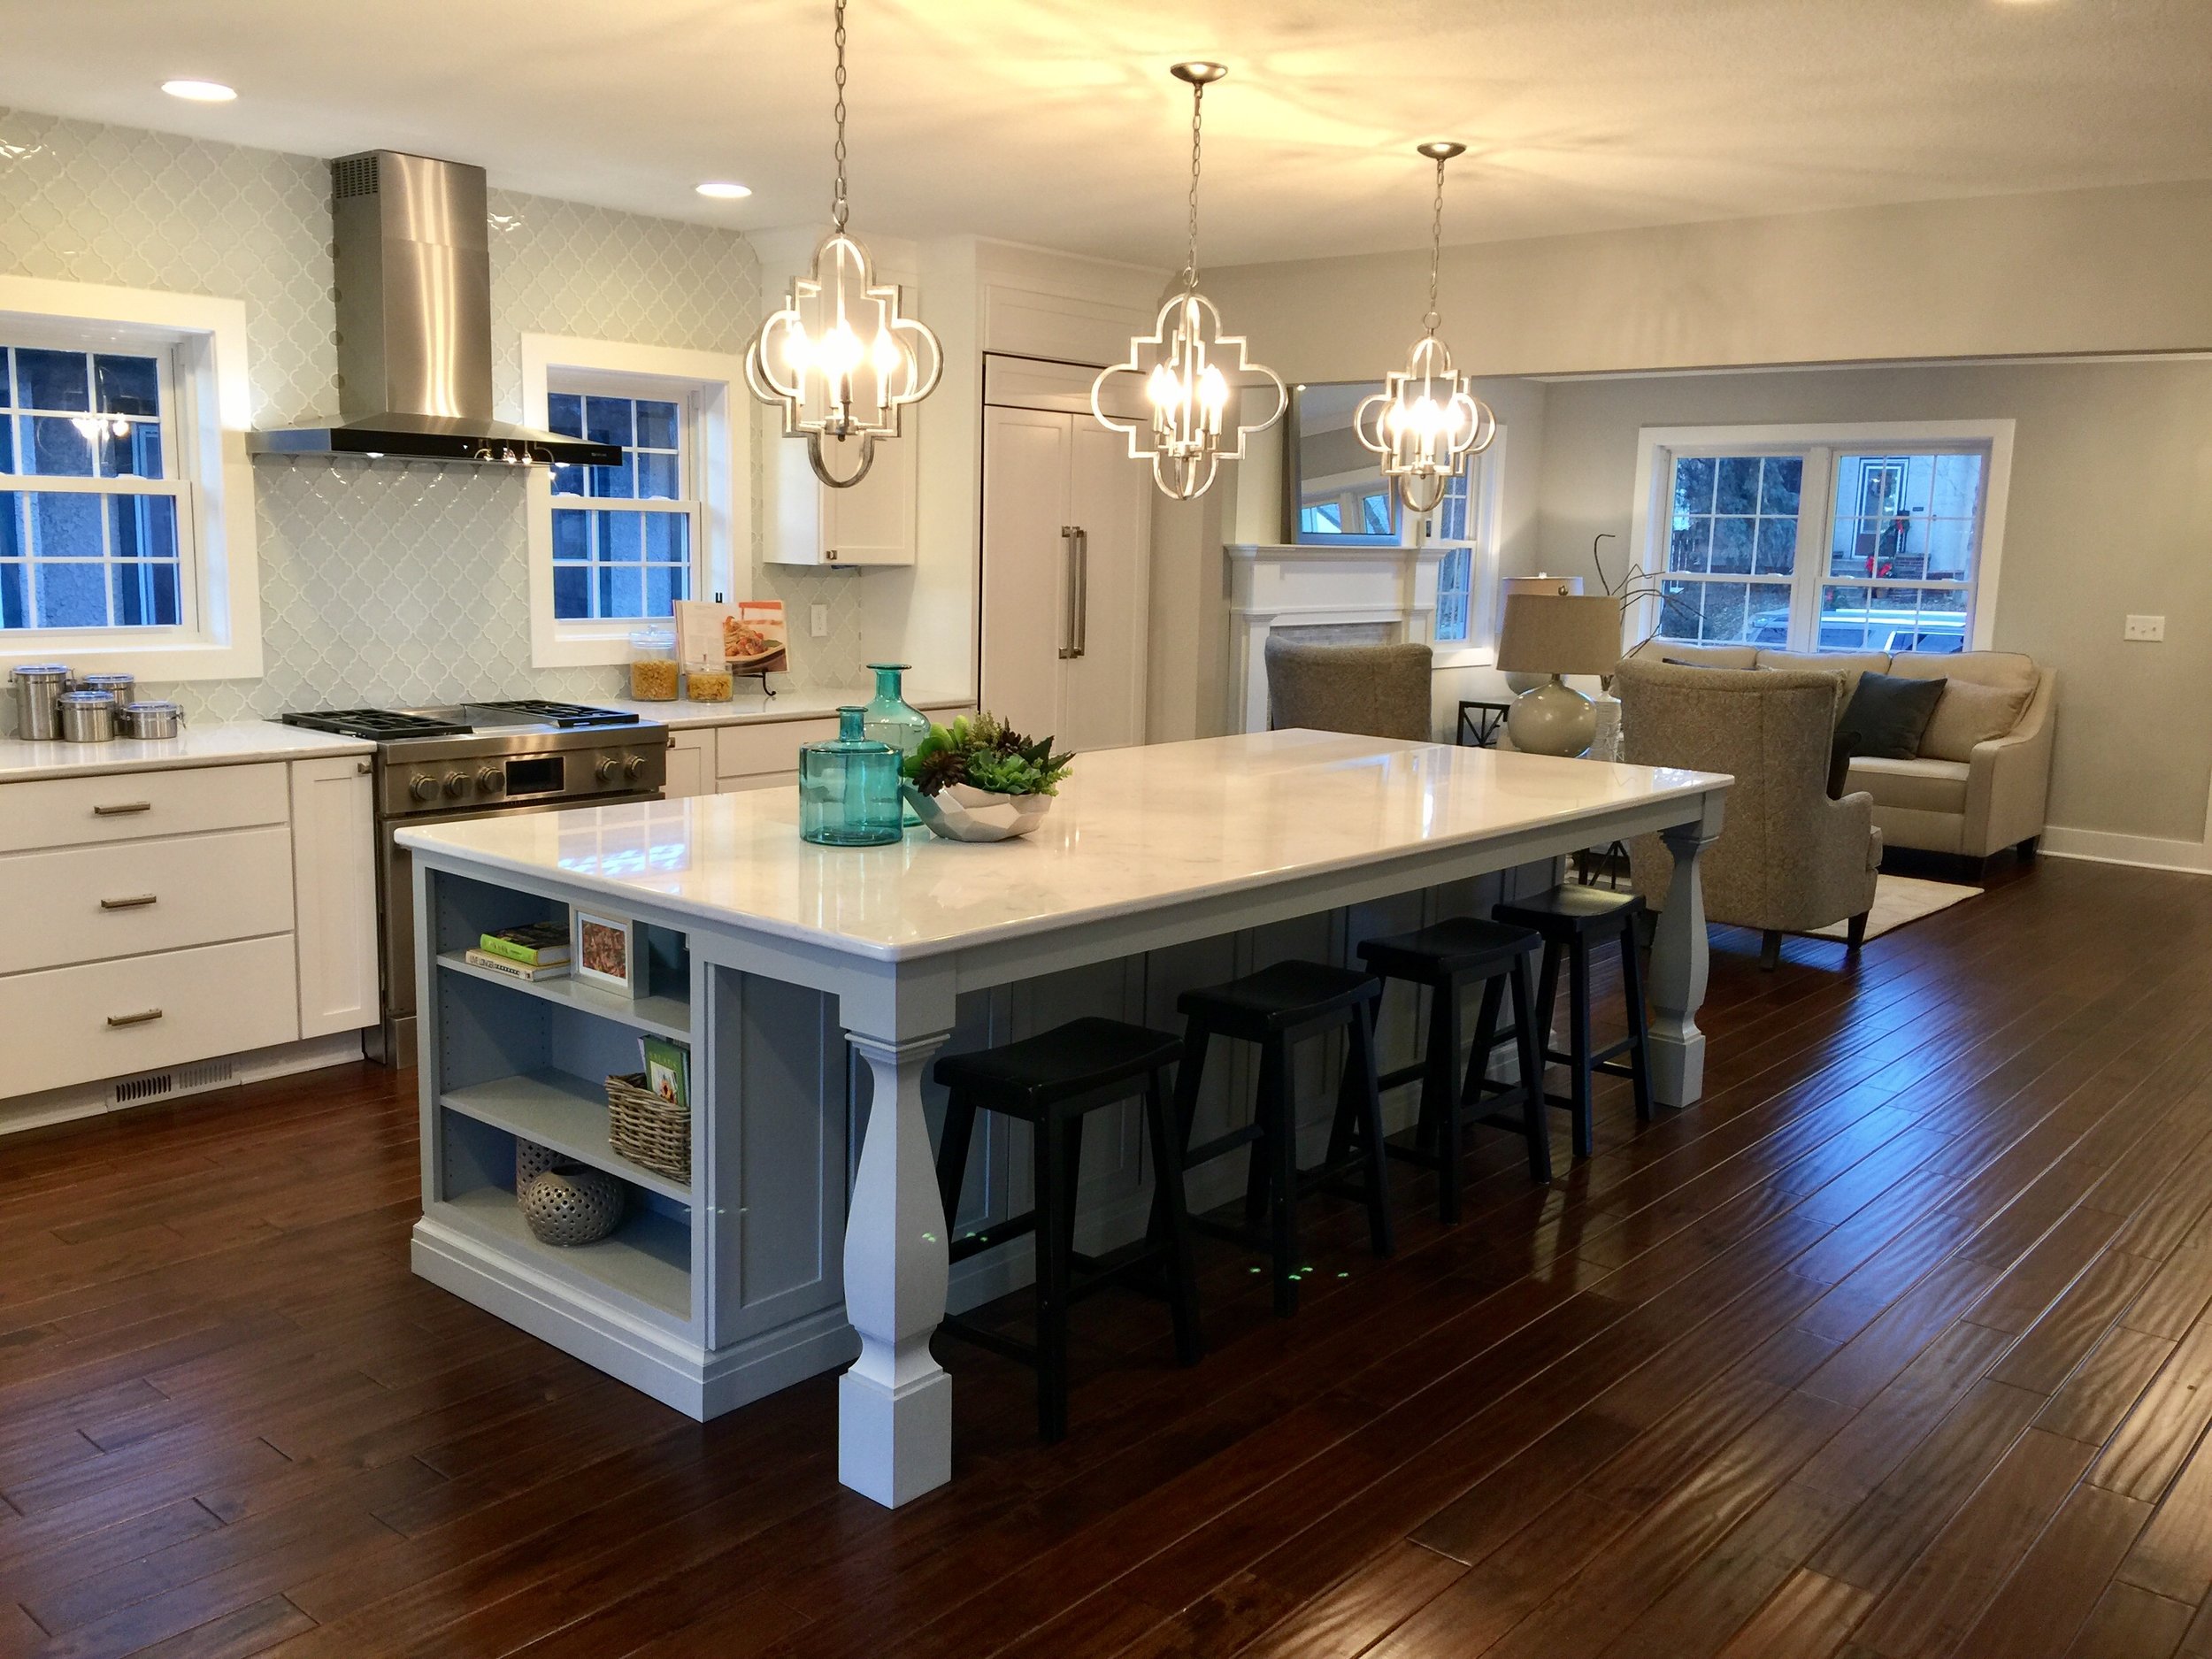 How To Choose The Best Pendant Lighting, Kitchen Island With Double Chandeliers